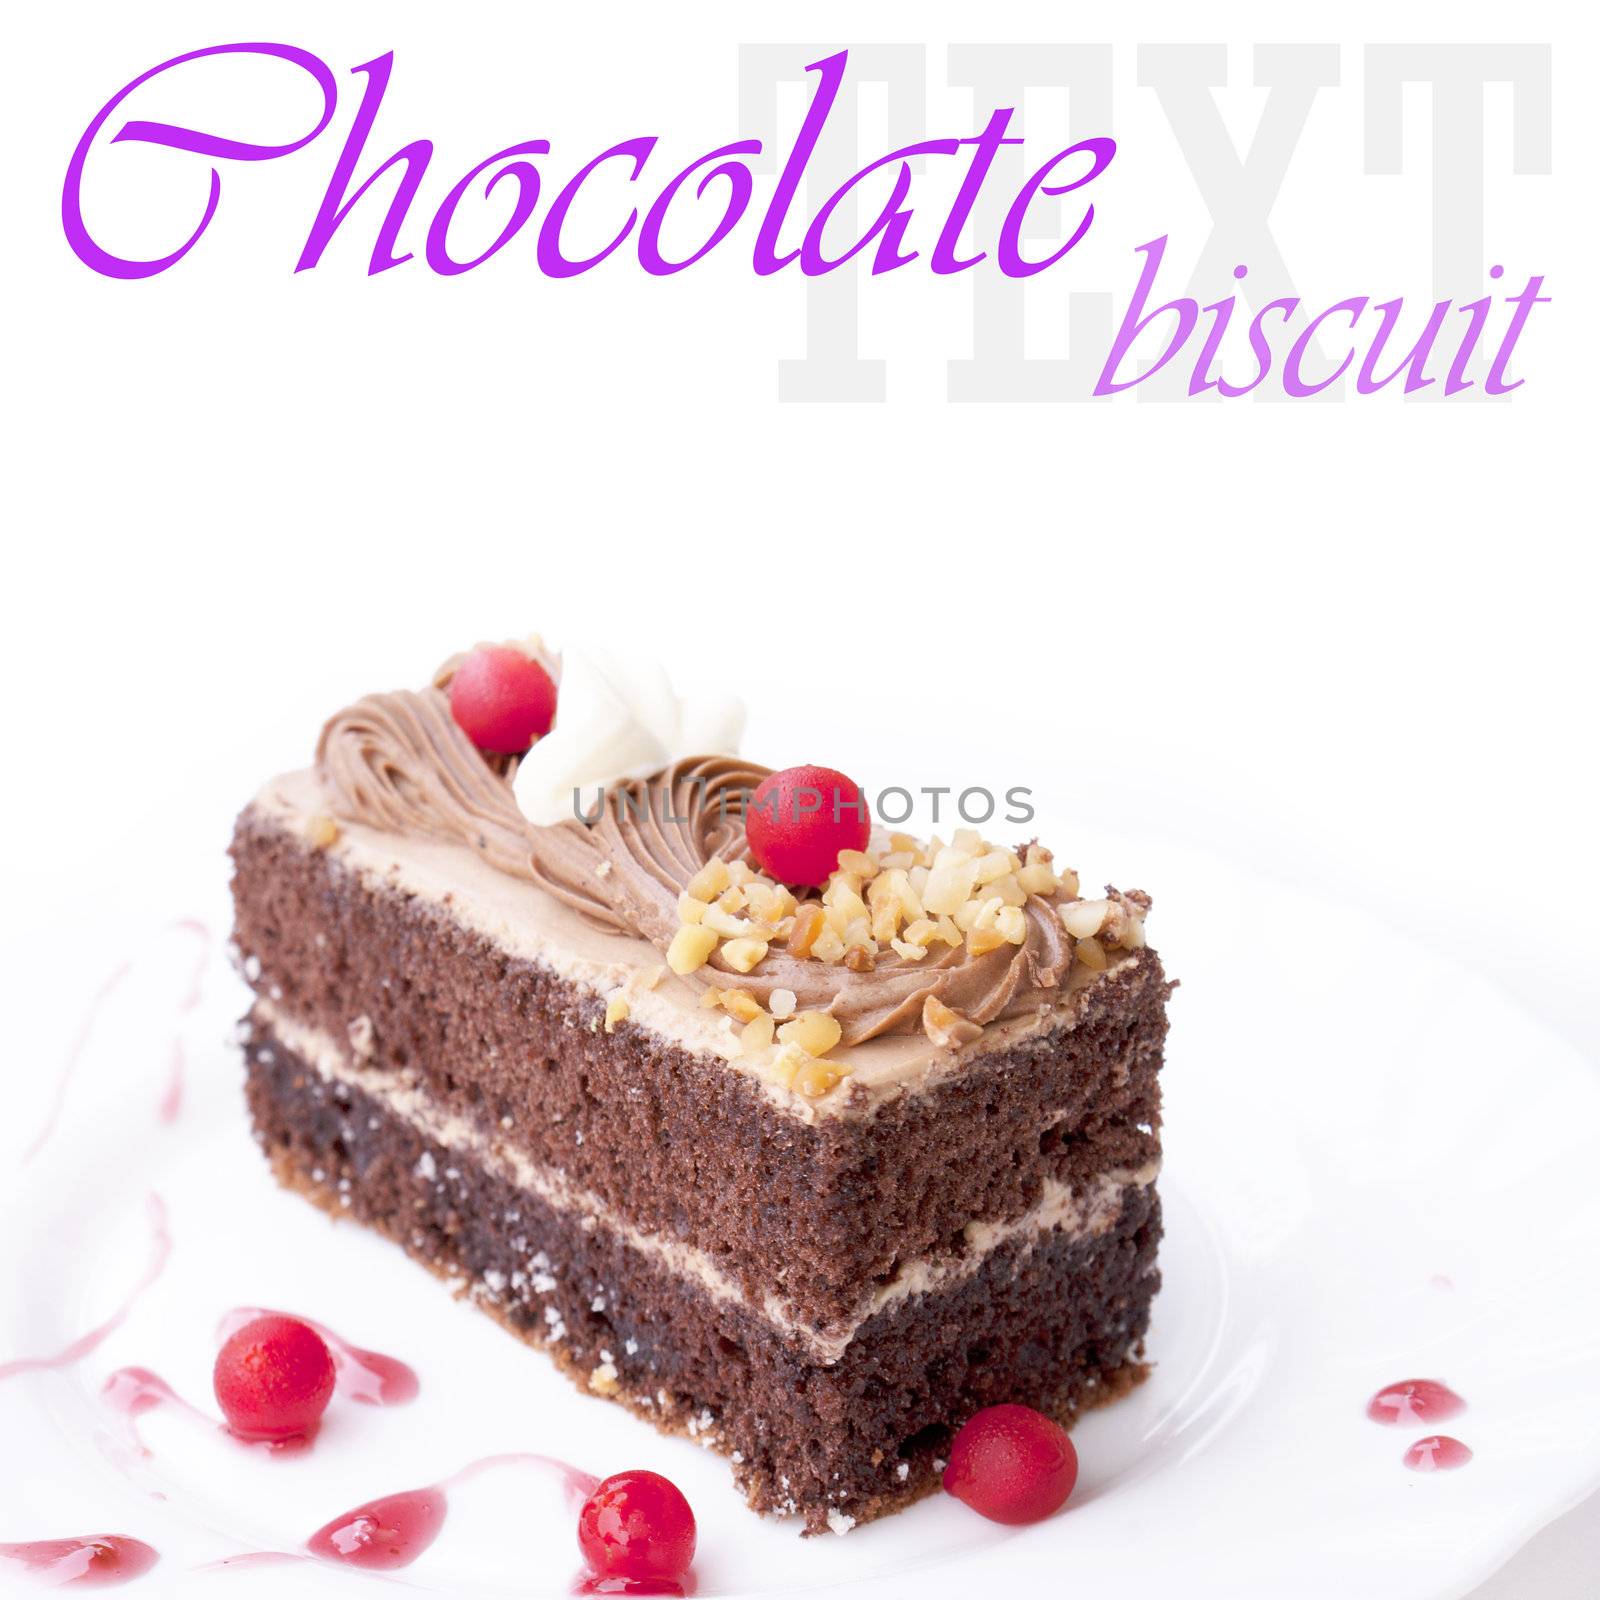 Sweet chocolate biscuit with fresh cherry by sergey150770SV